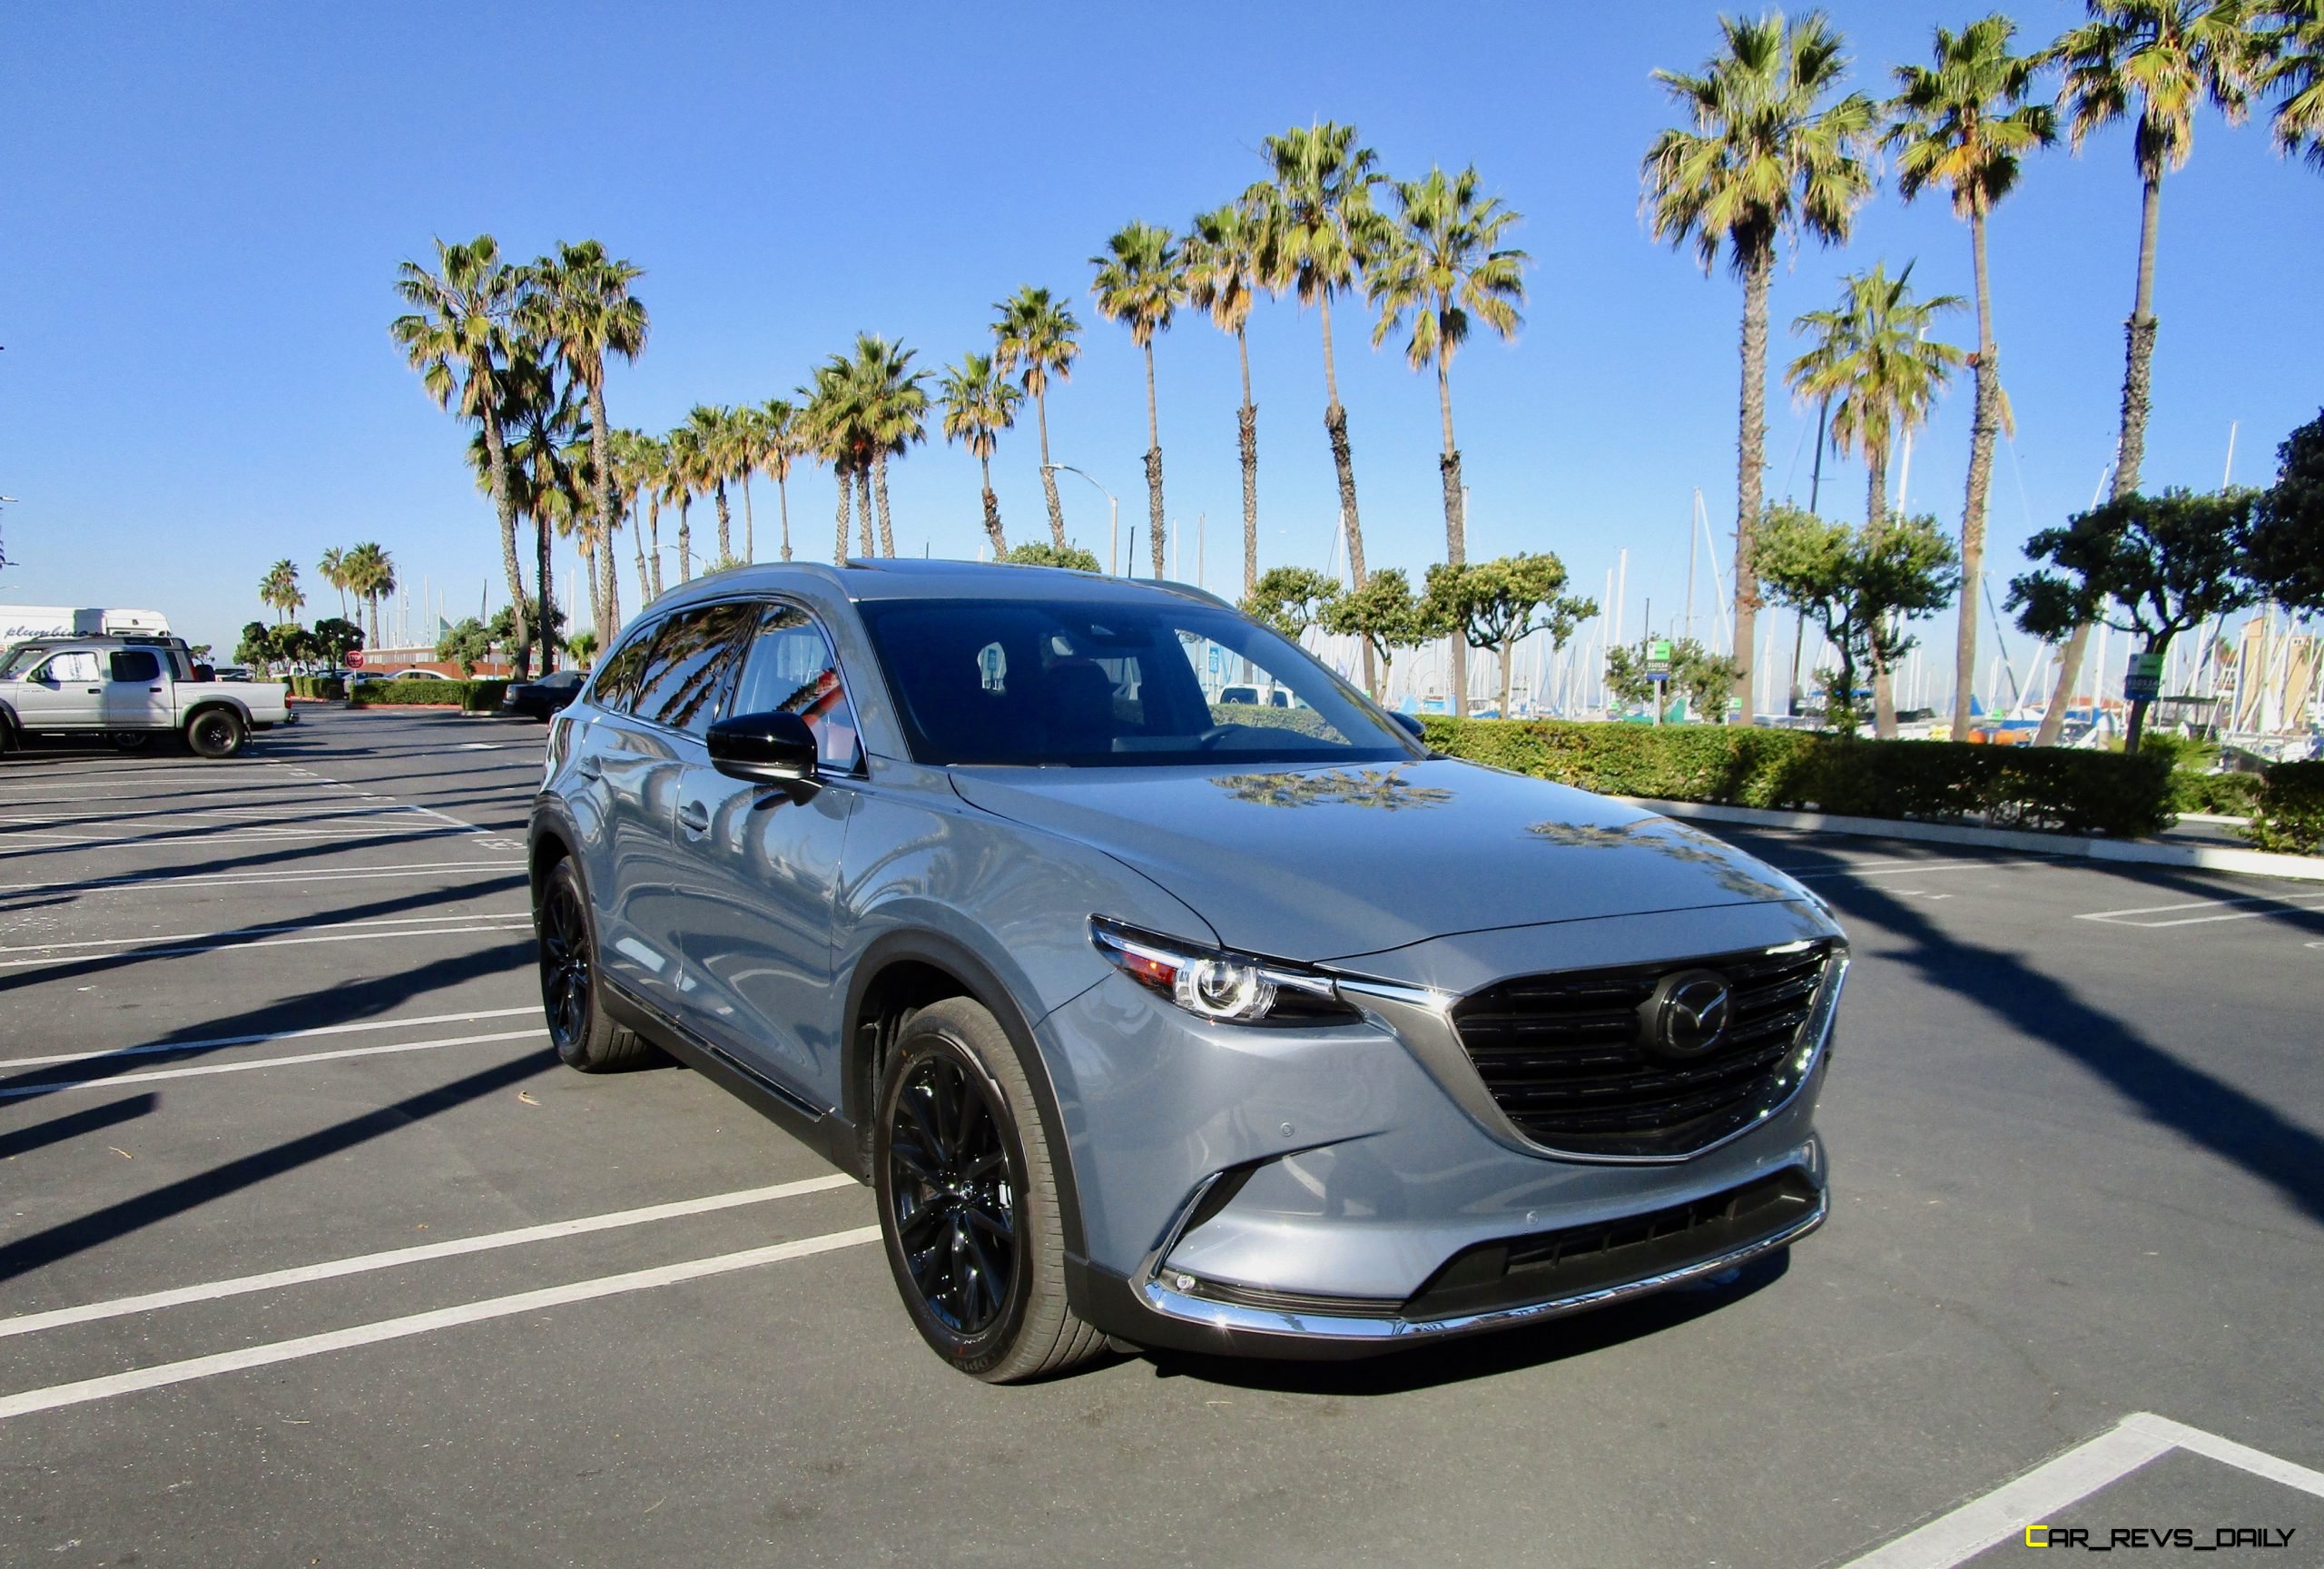 2022 Mazda CX9 Carbon Edition Review by Ben Lewis » ROAD TEST REVIEWS